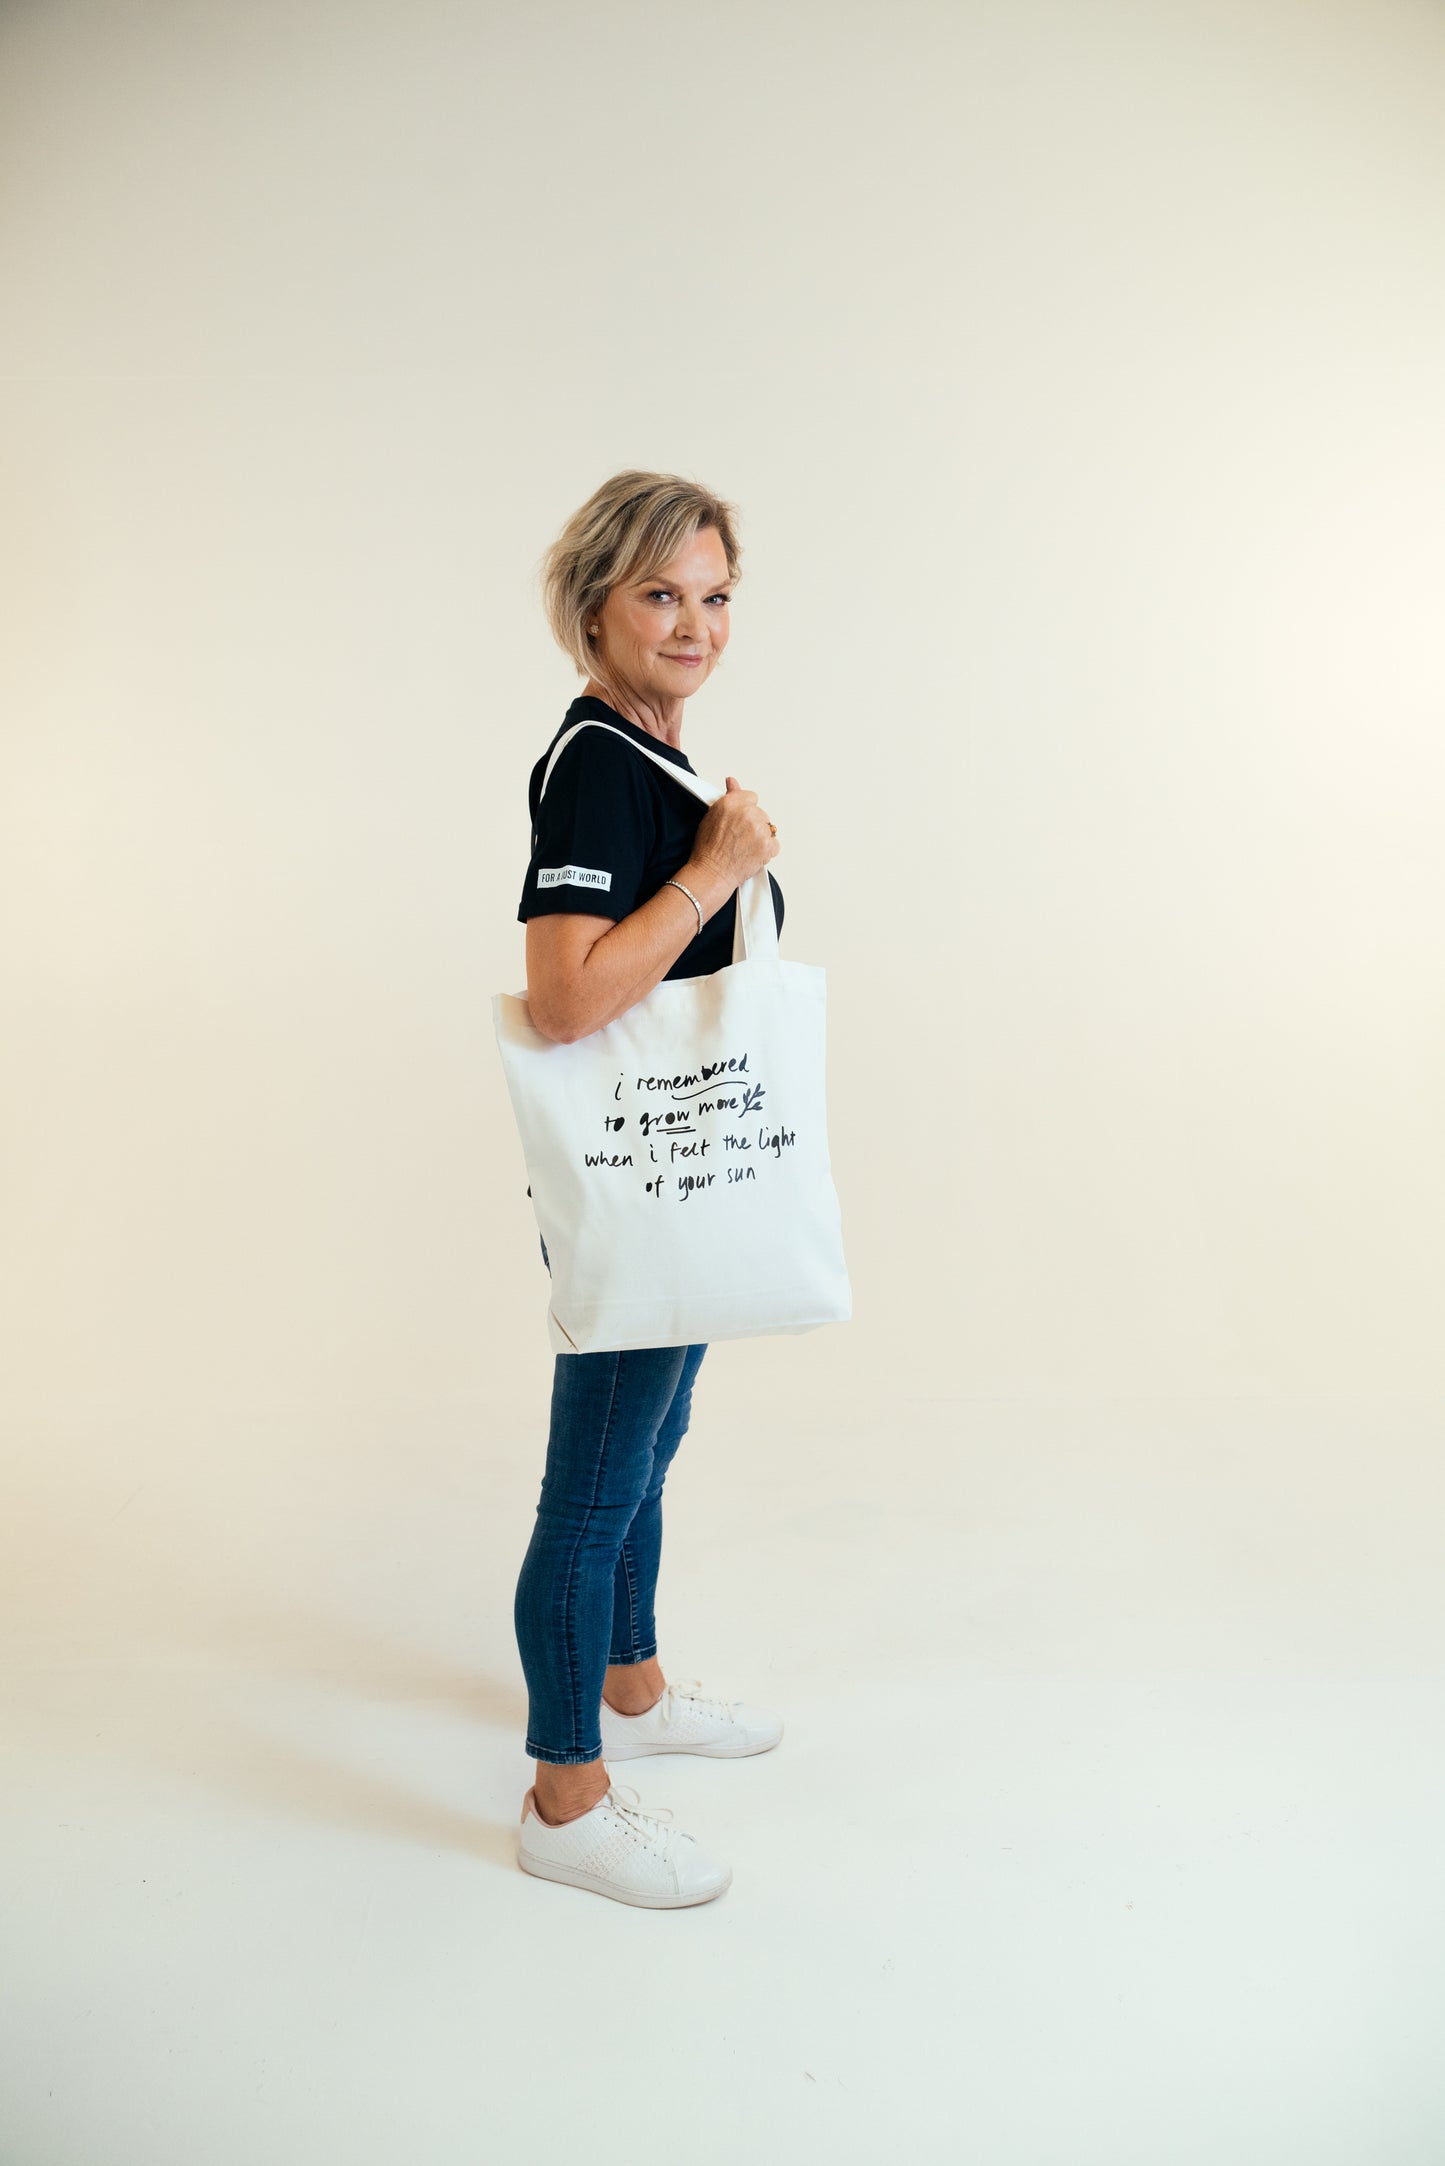 Kav Temperley tote Jenny holding cream tote bag looking at camera. Tote bag reads 'I remembered to grow more when I felt the light of you sun' in ink navy.